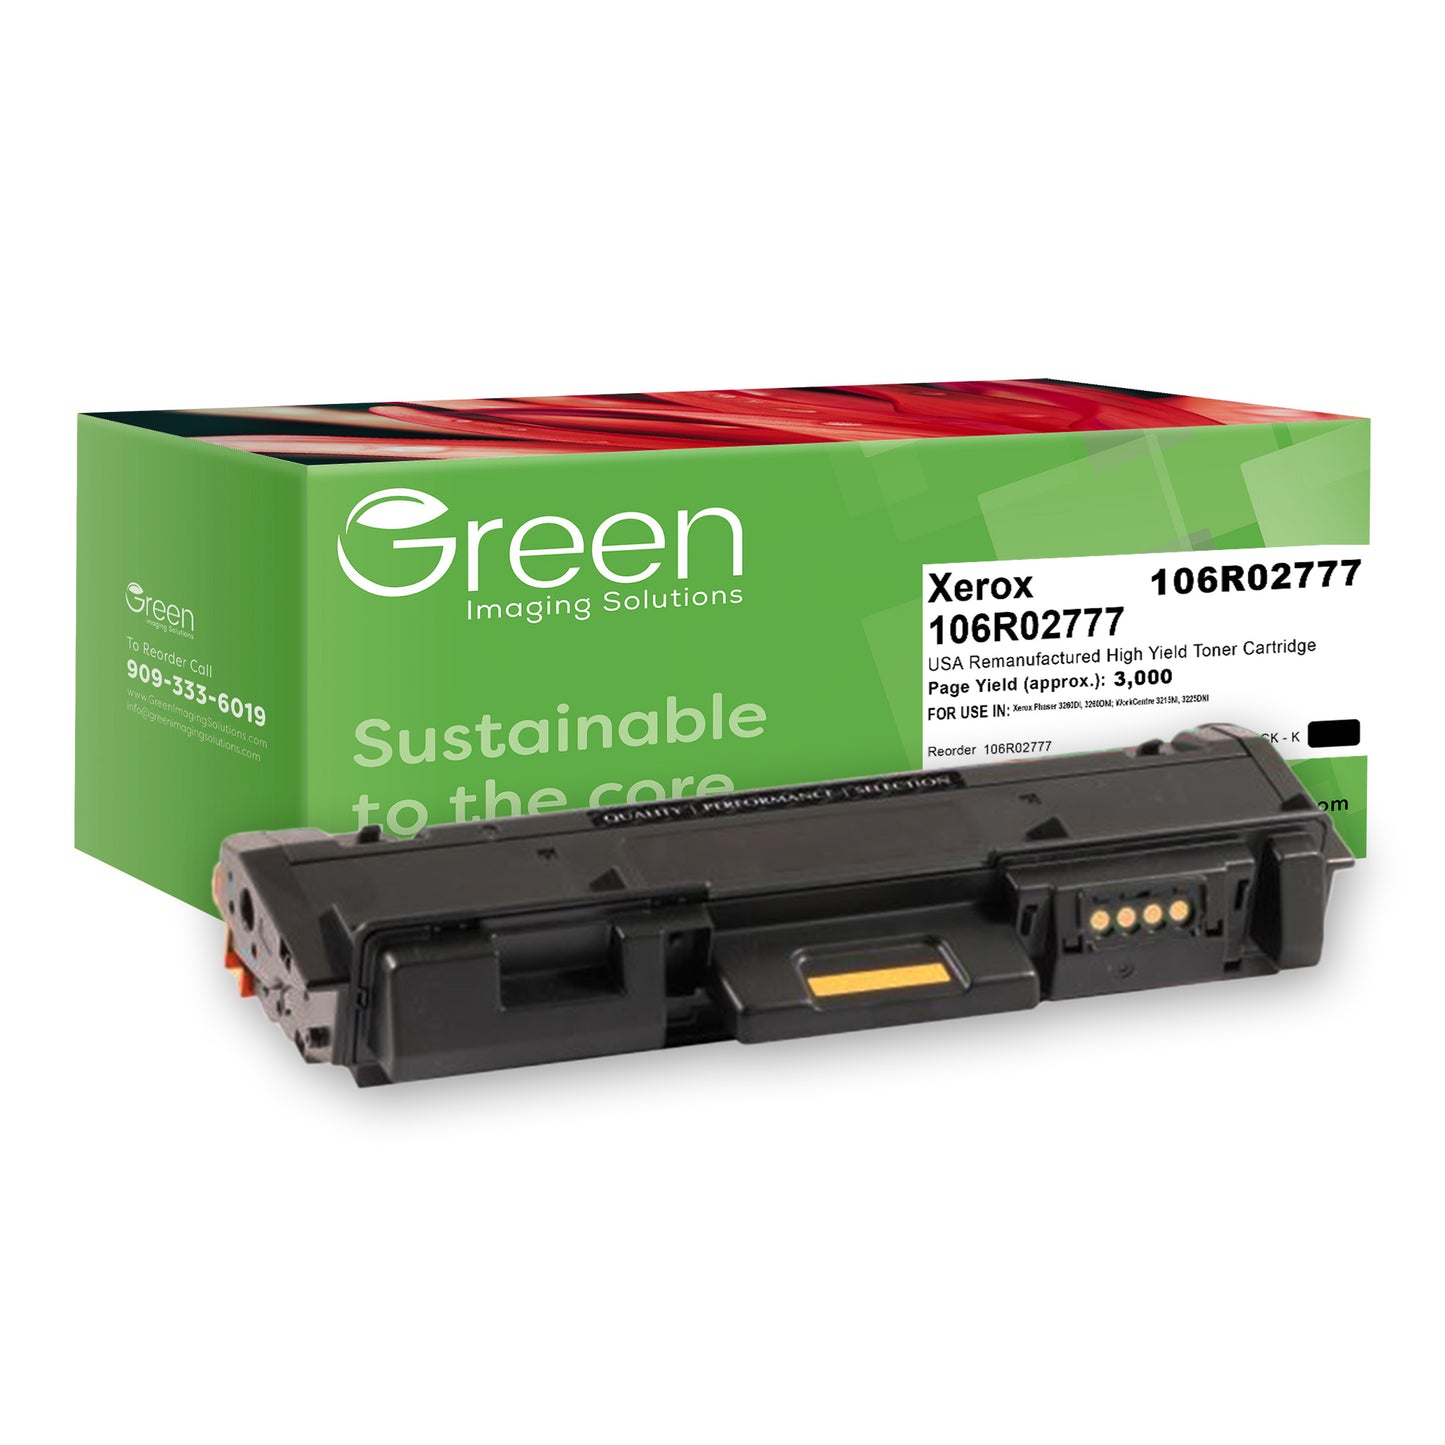 Green Imaging Solutions USA Remanufactured High Yield Toner Cartridge for Xerox 106R02777